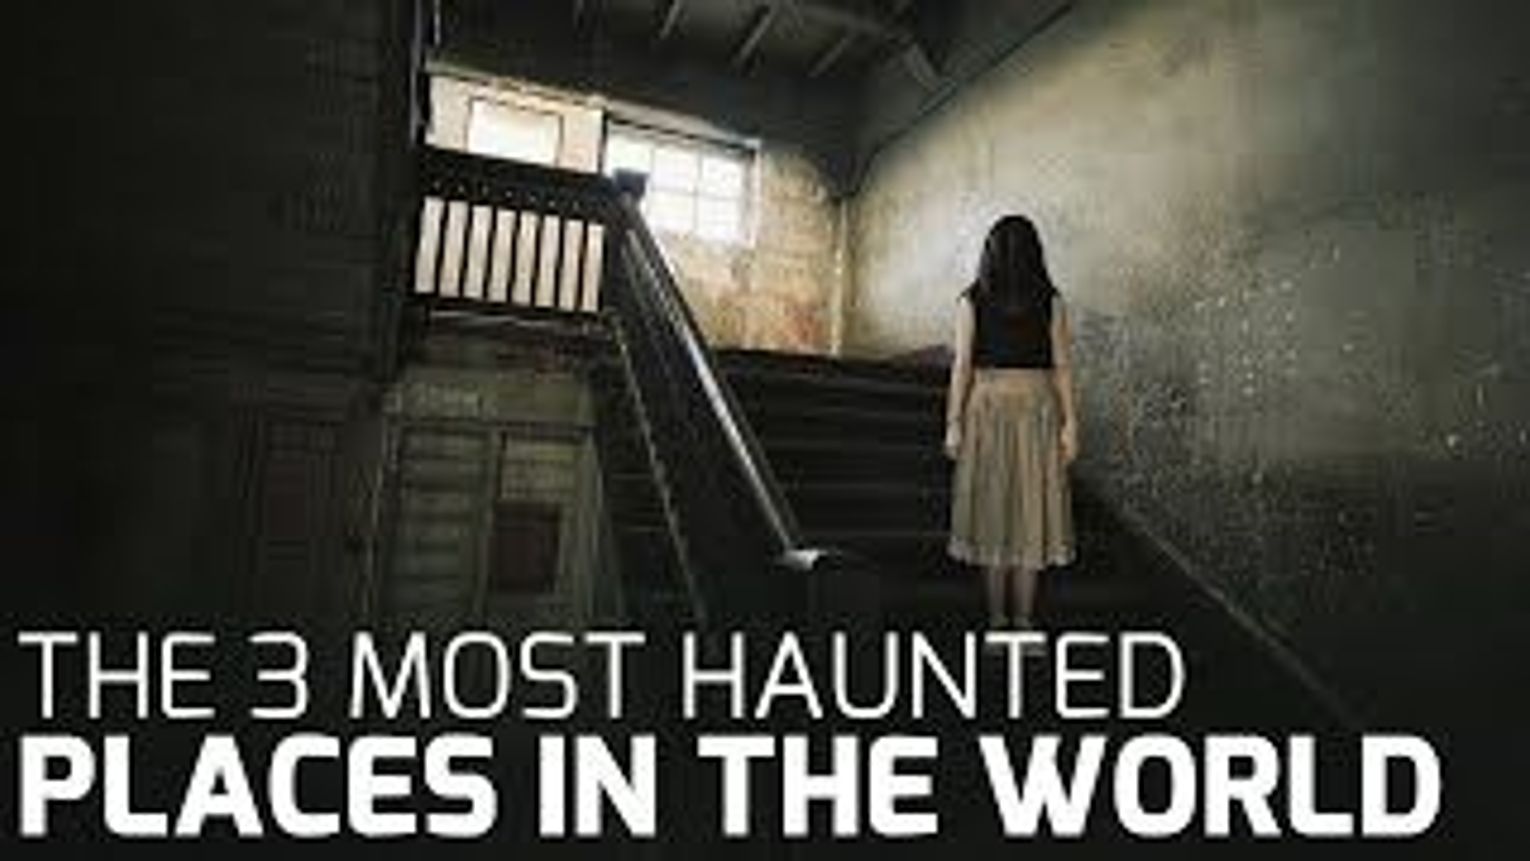 The 3 Most Haunted Places in the World